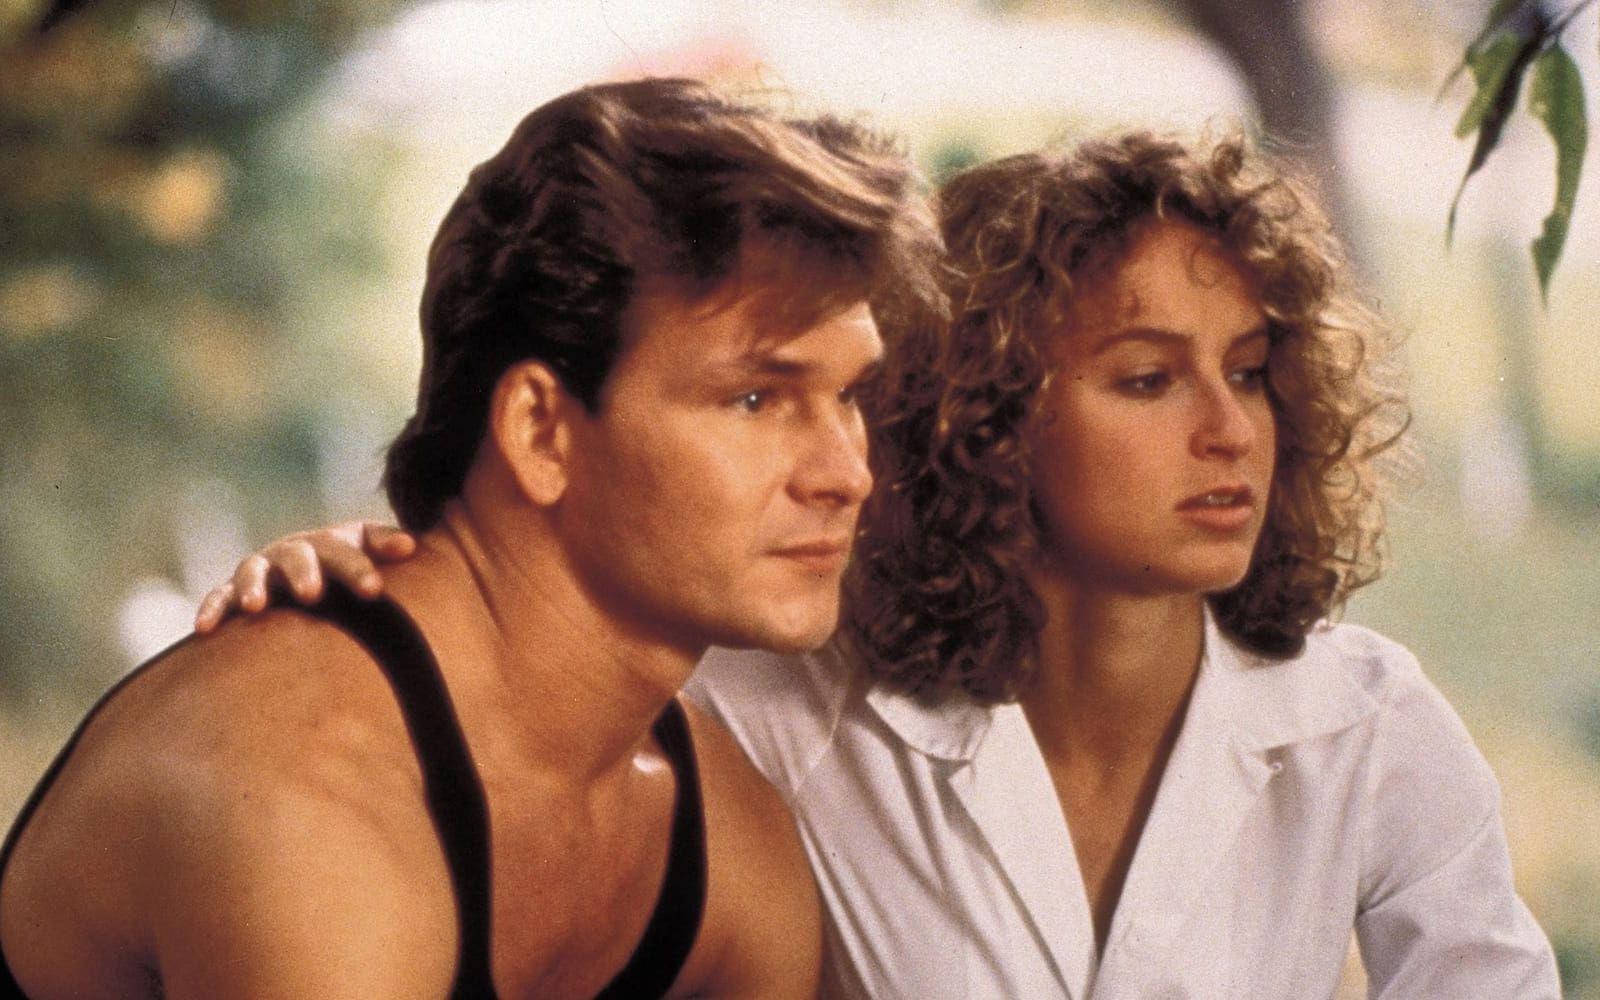 “Me? I’m scared of everything. I’m scared of what I saw, I’m scared of what I did, of who I am, and most of all I’m scared of walking out of this room and never feeling the rest of my whole life the way I feel when I’m with you.” - Baby (Jennifer Grey) till Johnny (Patrick Swayze) i ”Dirty dancing” från 1987.  Foto: Stella Pictures